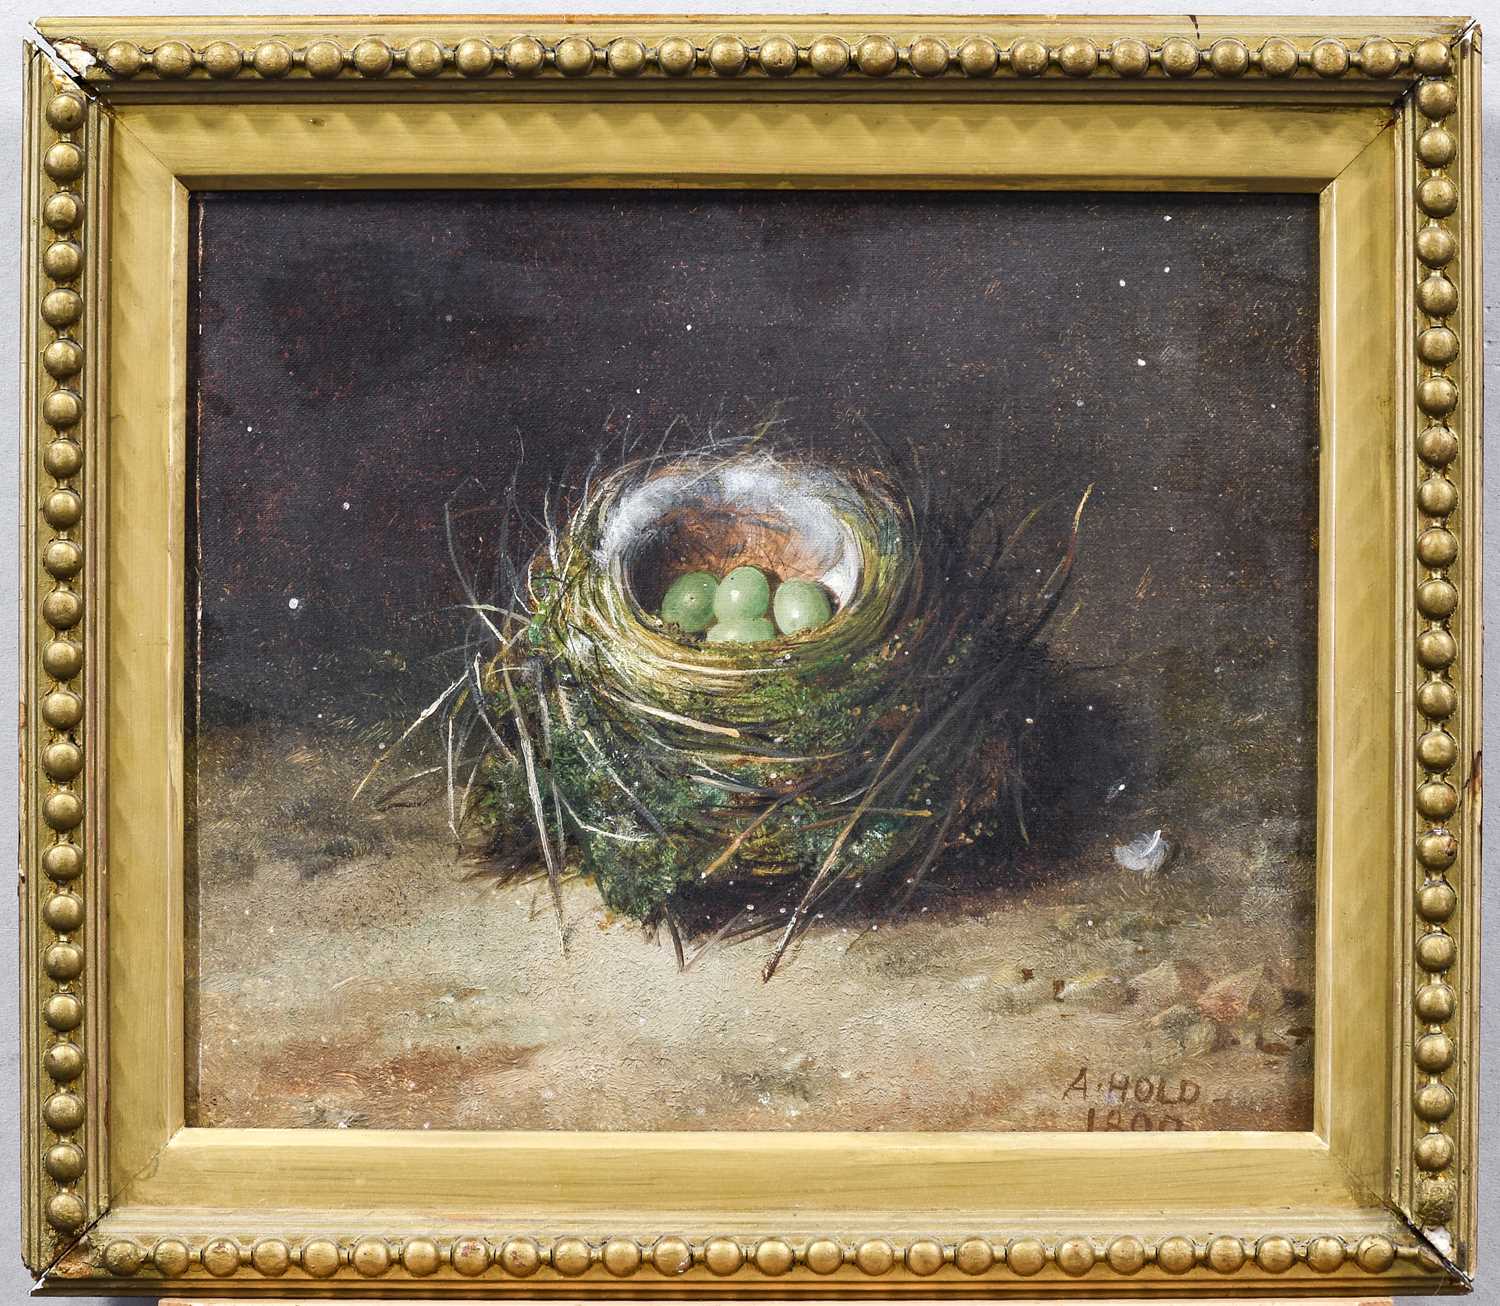 Abel Hold (1815-1896)A still life of a birds nest with green eggsA still life of a birds nest with - Image 3 of 6